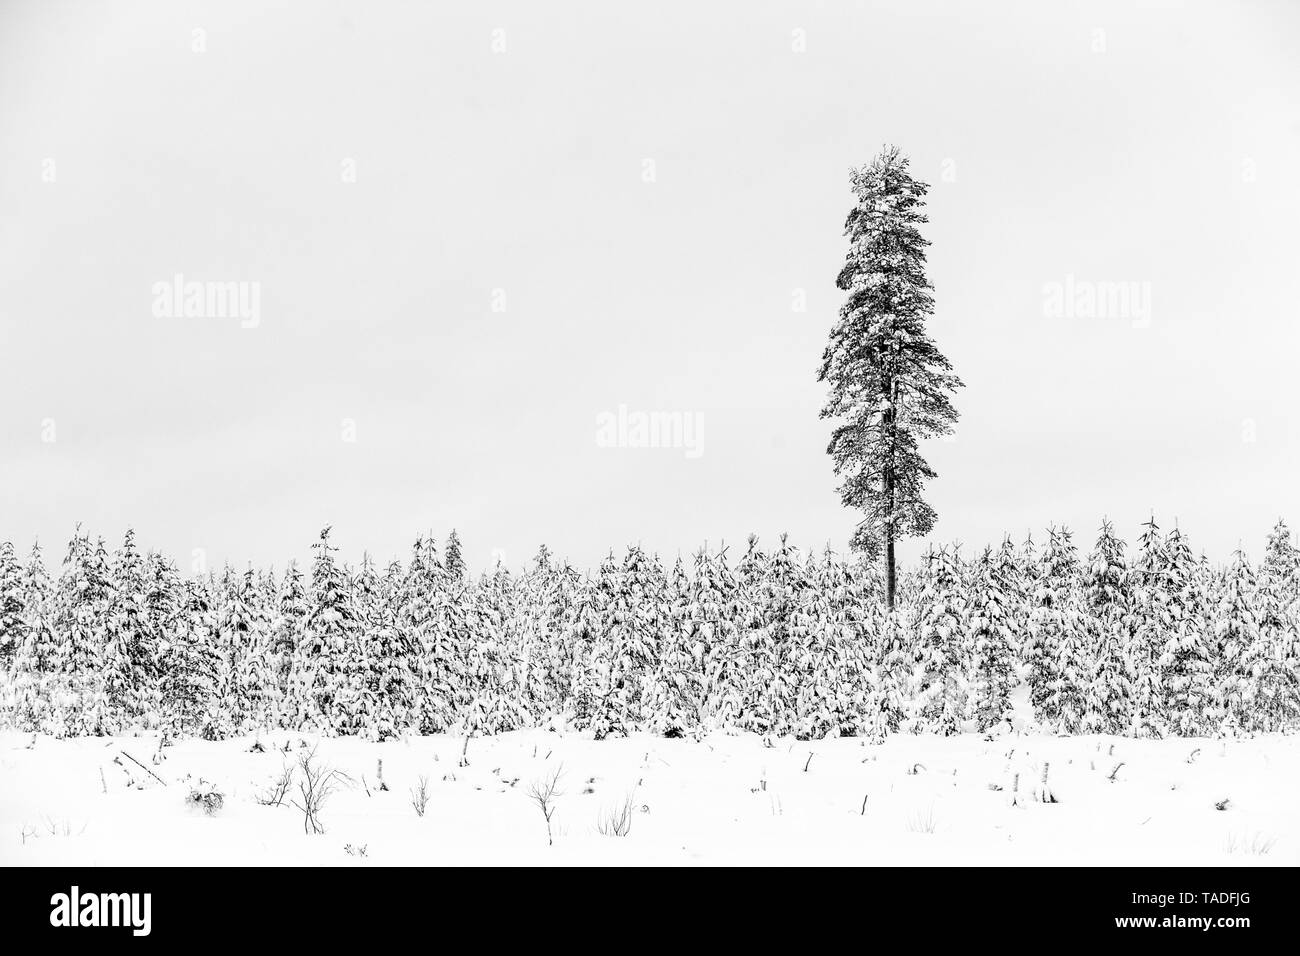 Cold and snowy winter in Lapland Stock Photo